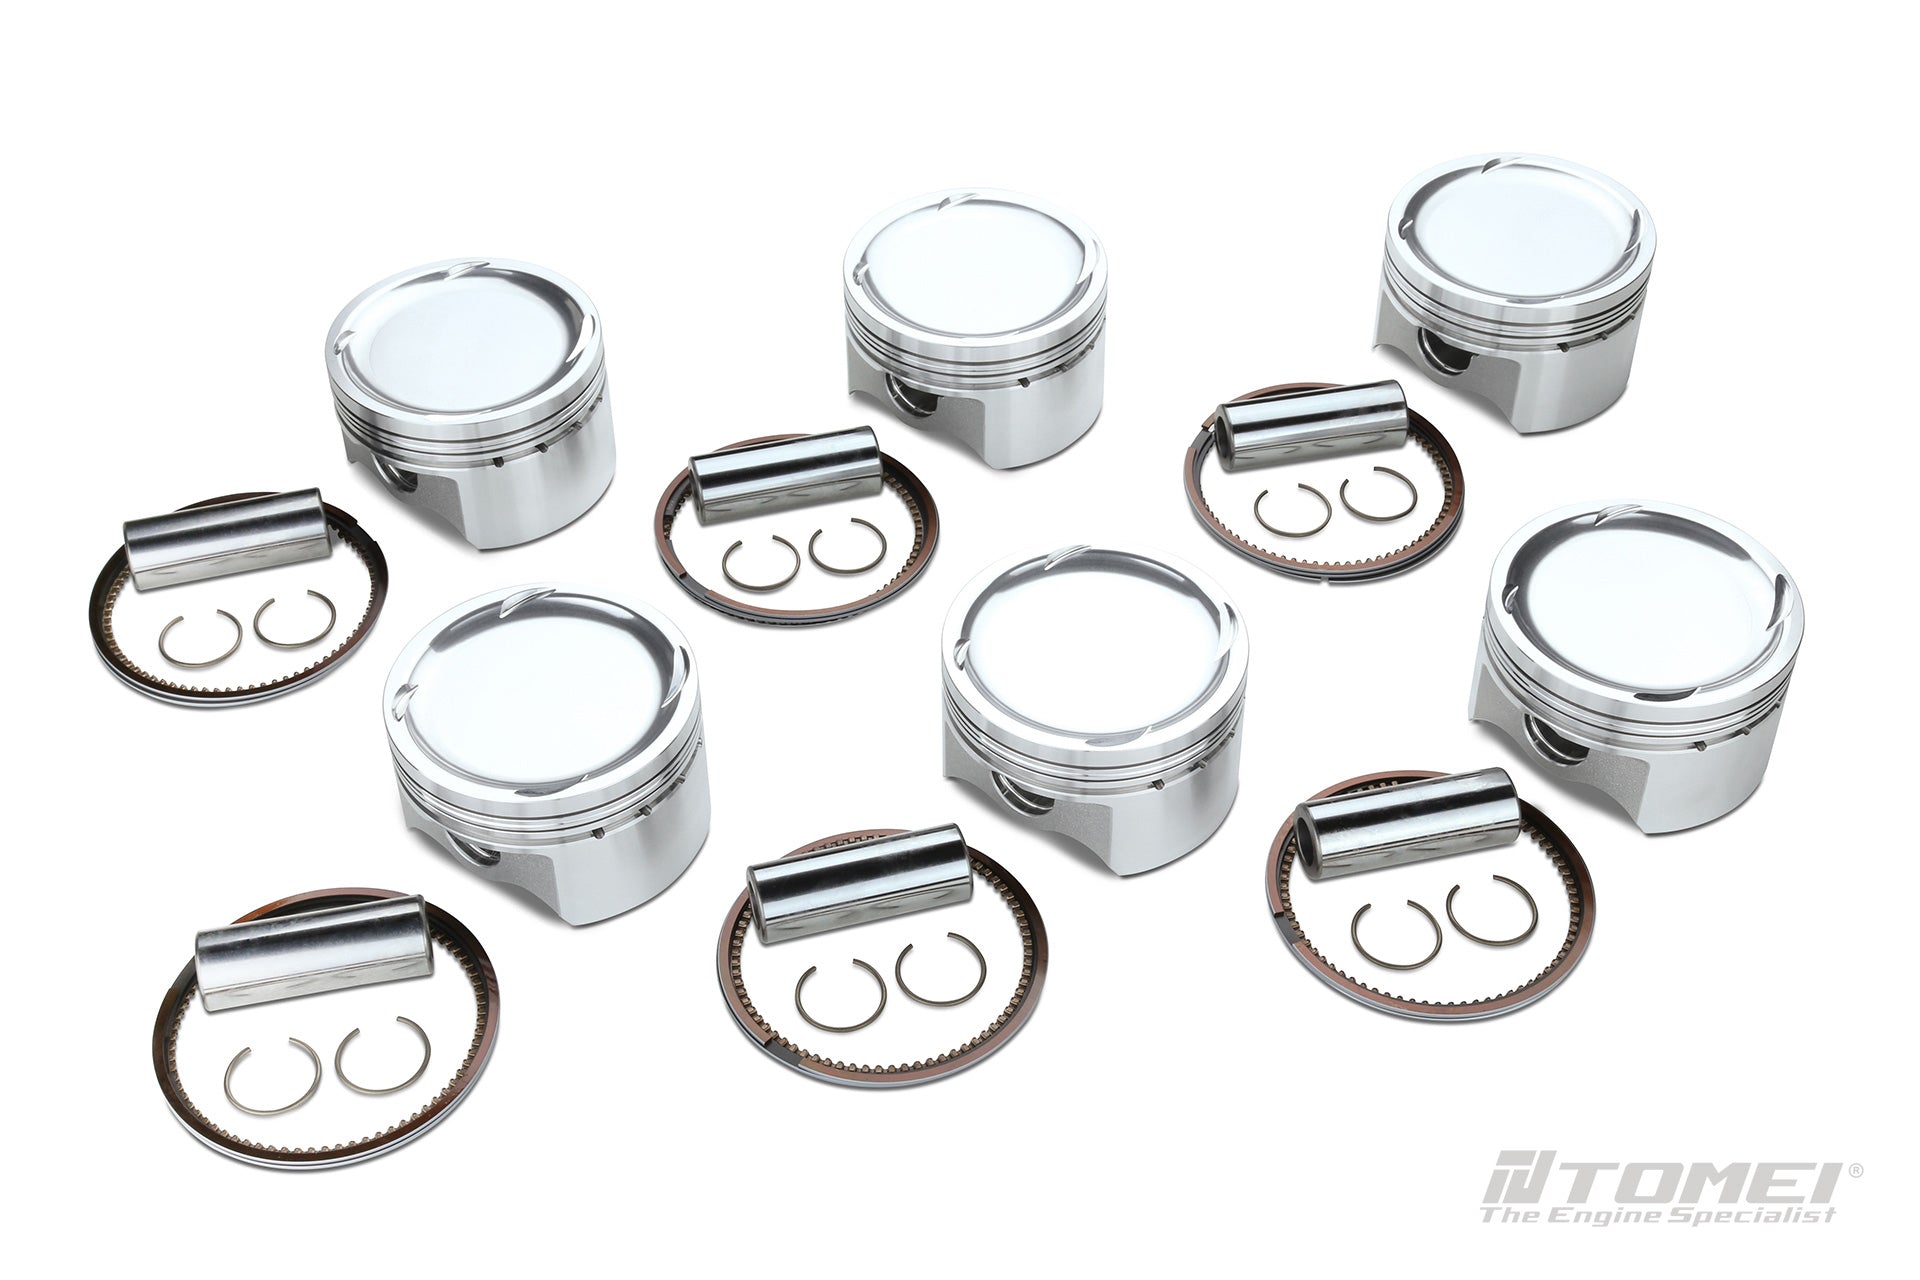 TOMEI FORGED PISTON KIT 2JZ-GTE 3.4 87.00mm (Previous Part Number 1162870212)